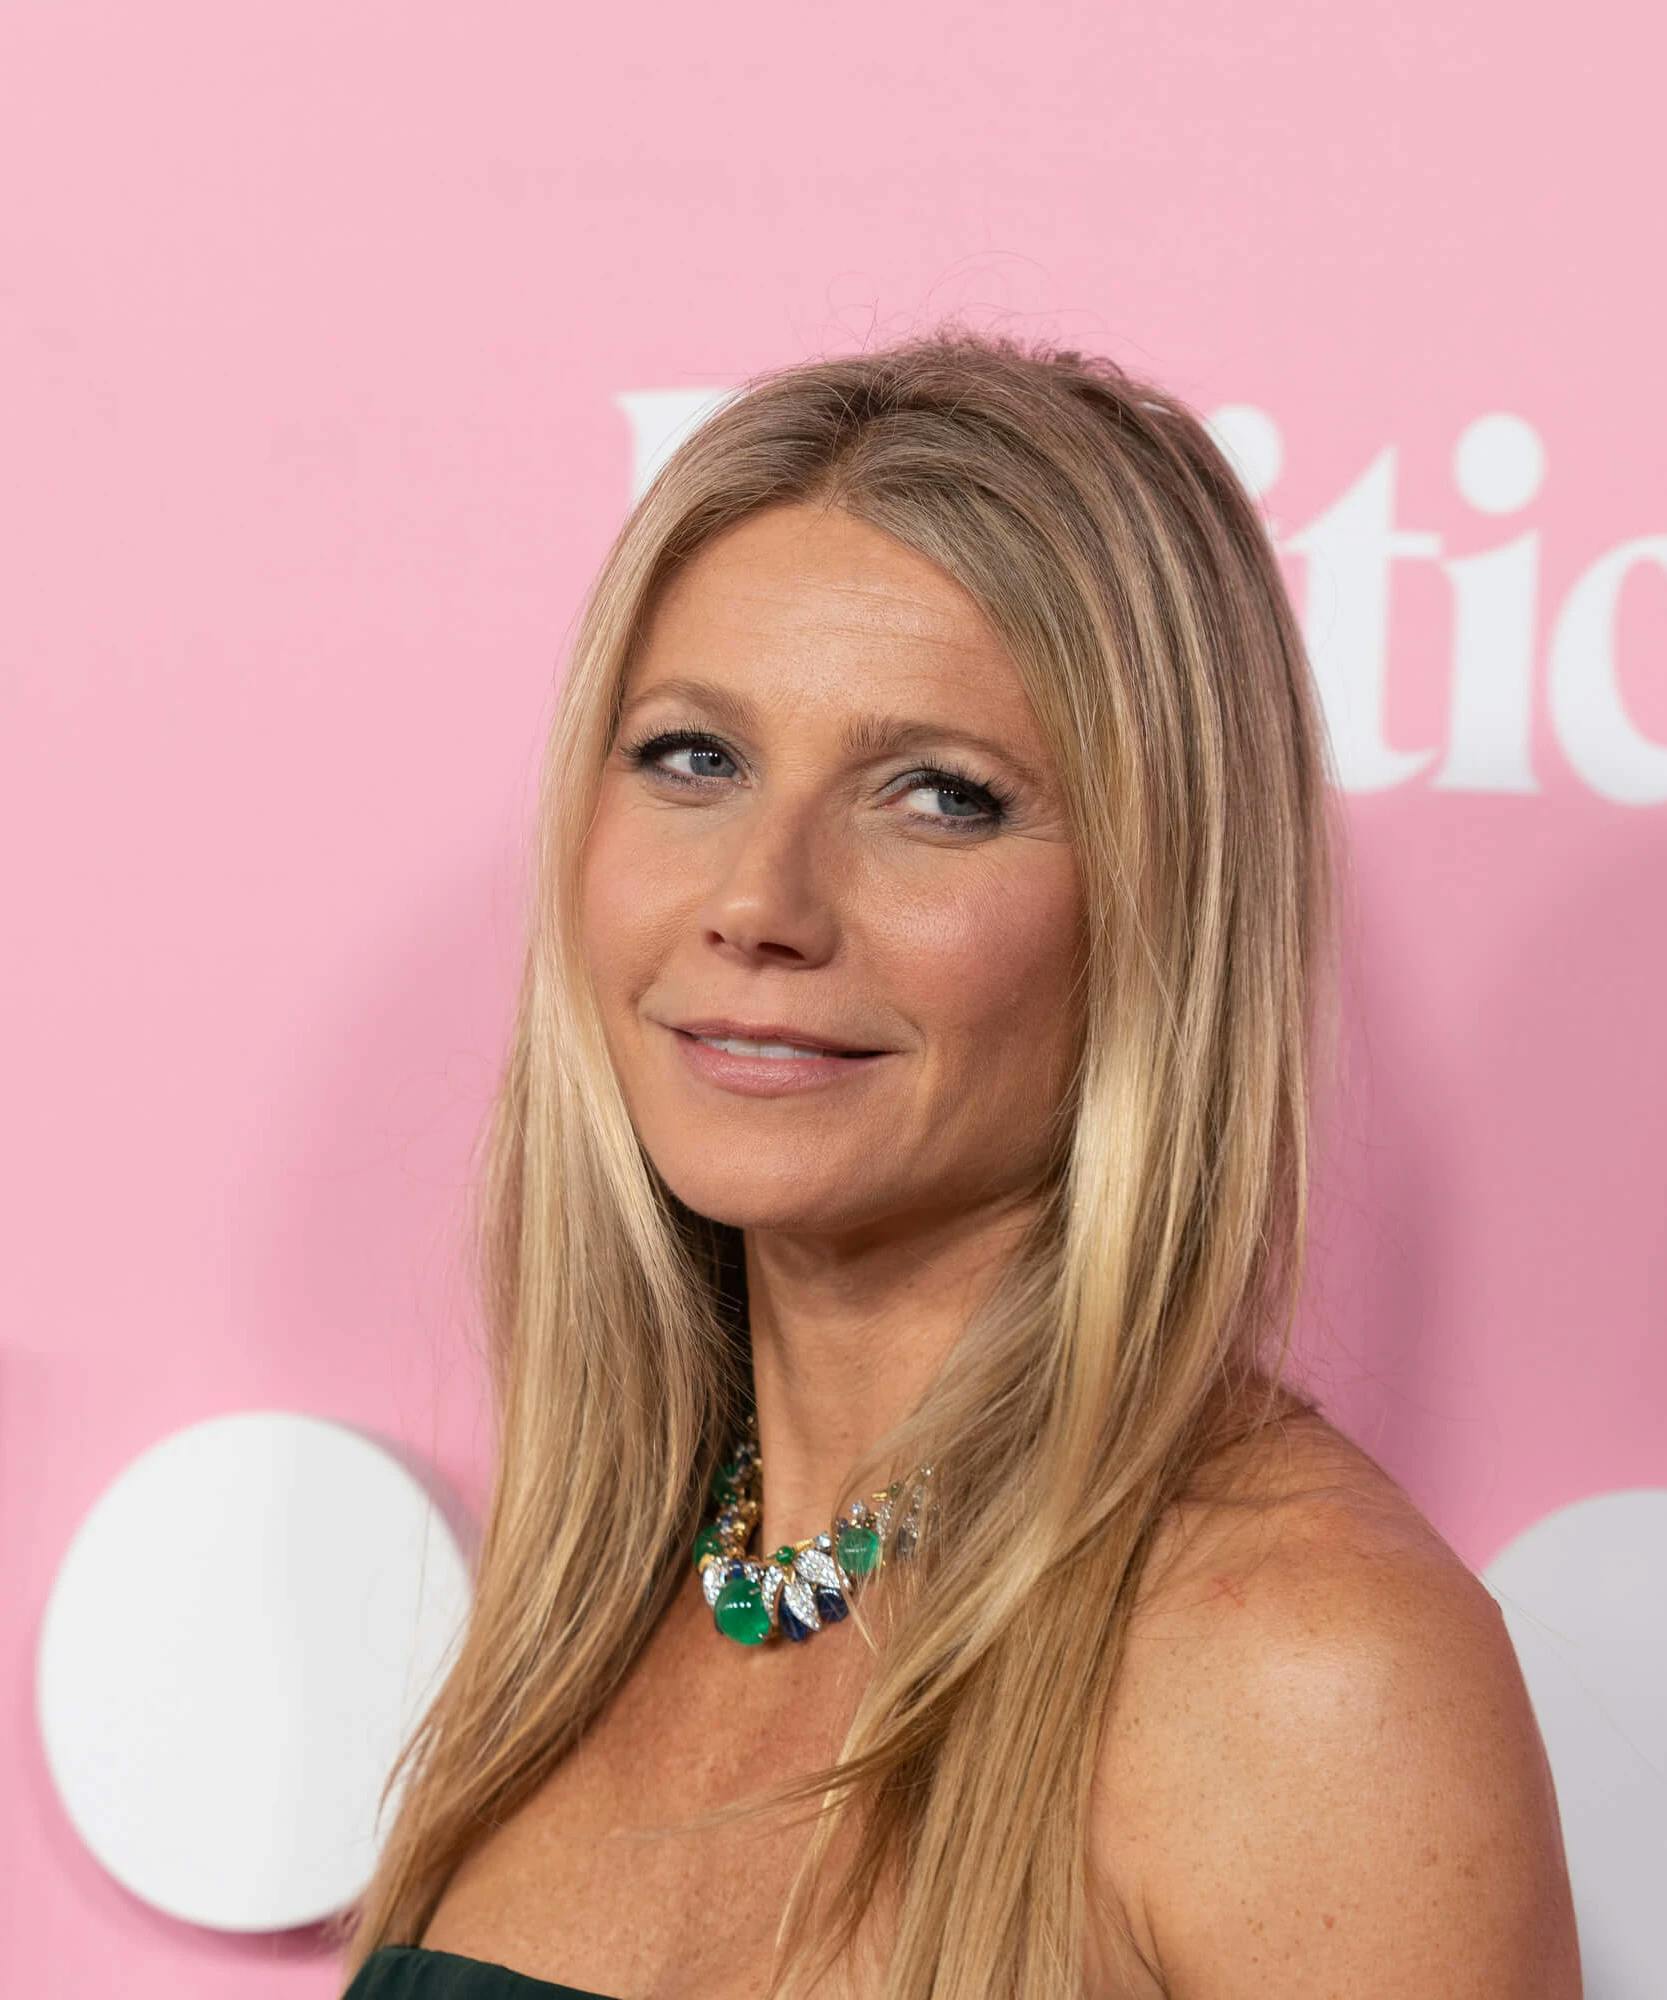 Gwyneth Paltrow Suggests There’s Such A Thing As ‘Ethical Porn’